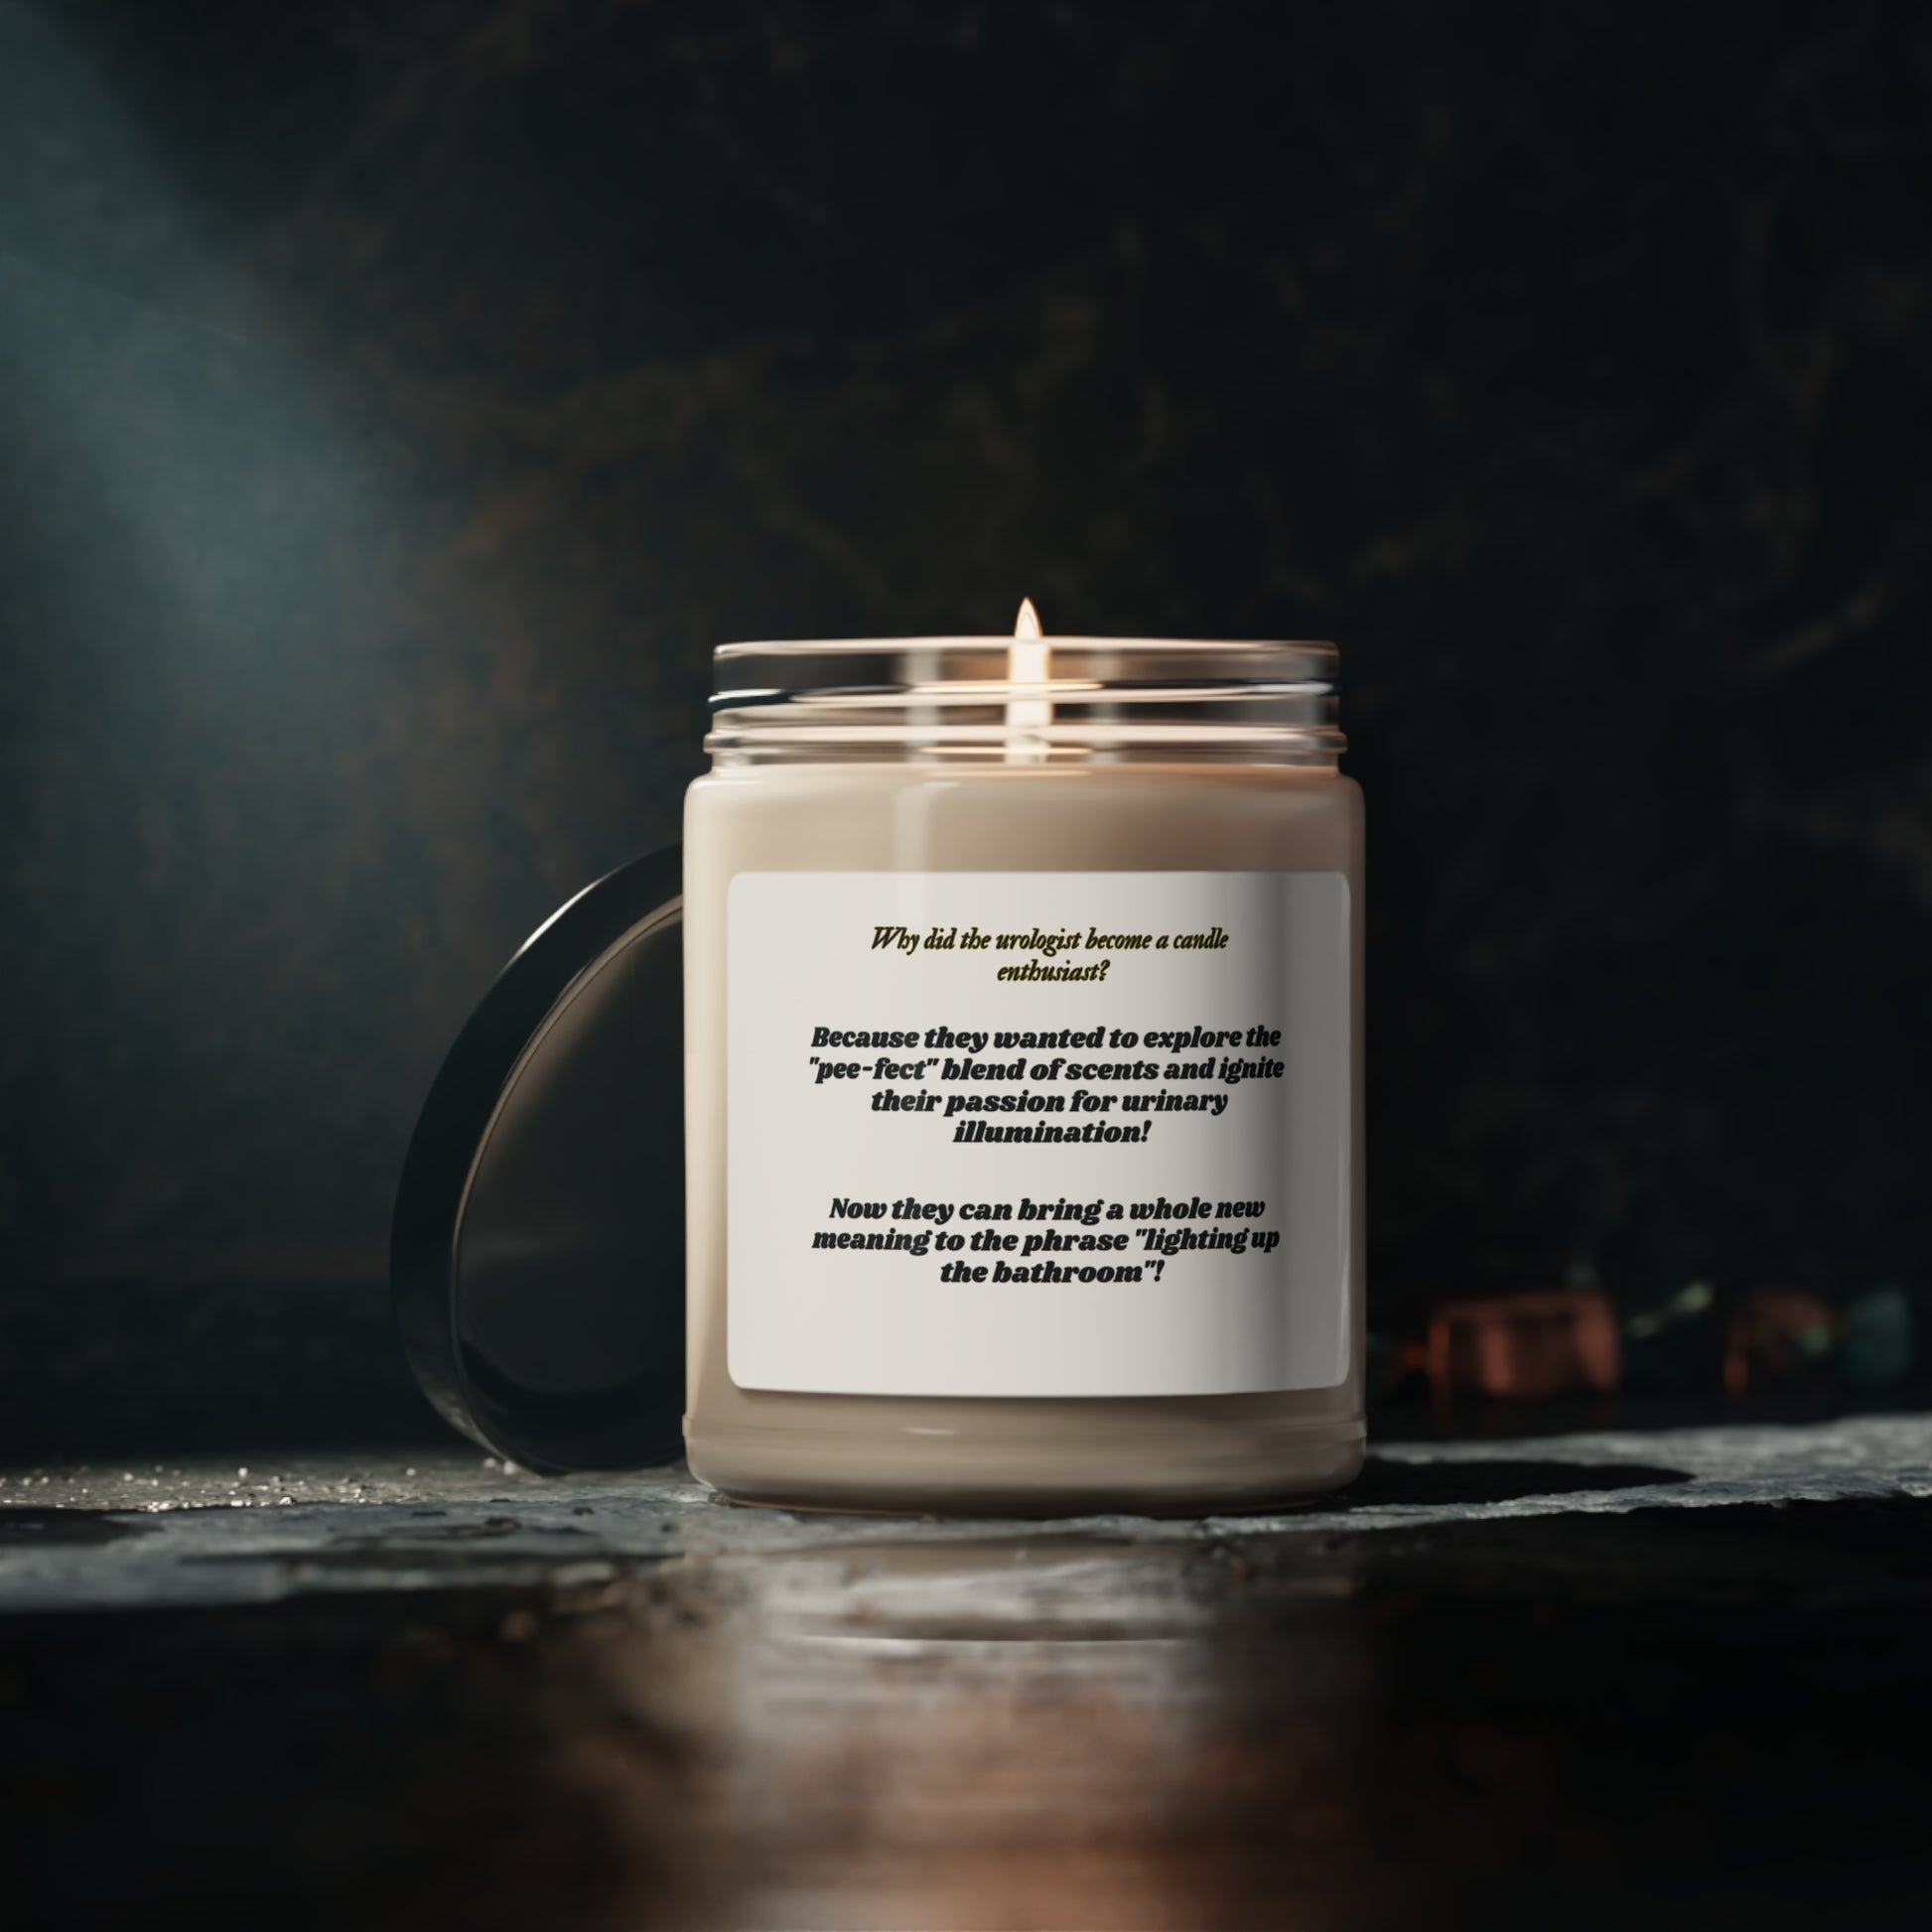 Lighten the Mood with Our Urologist's Delight Candle - A Funny and Unique Gift for Urologists Home Decor   